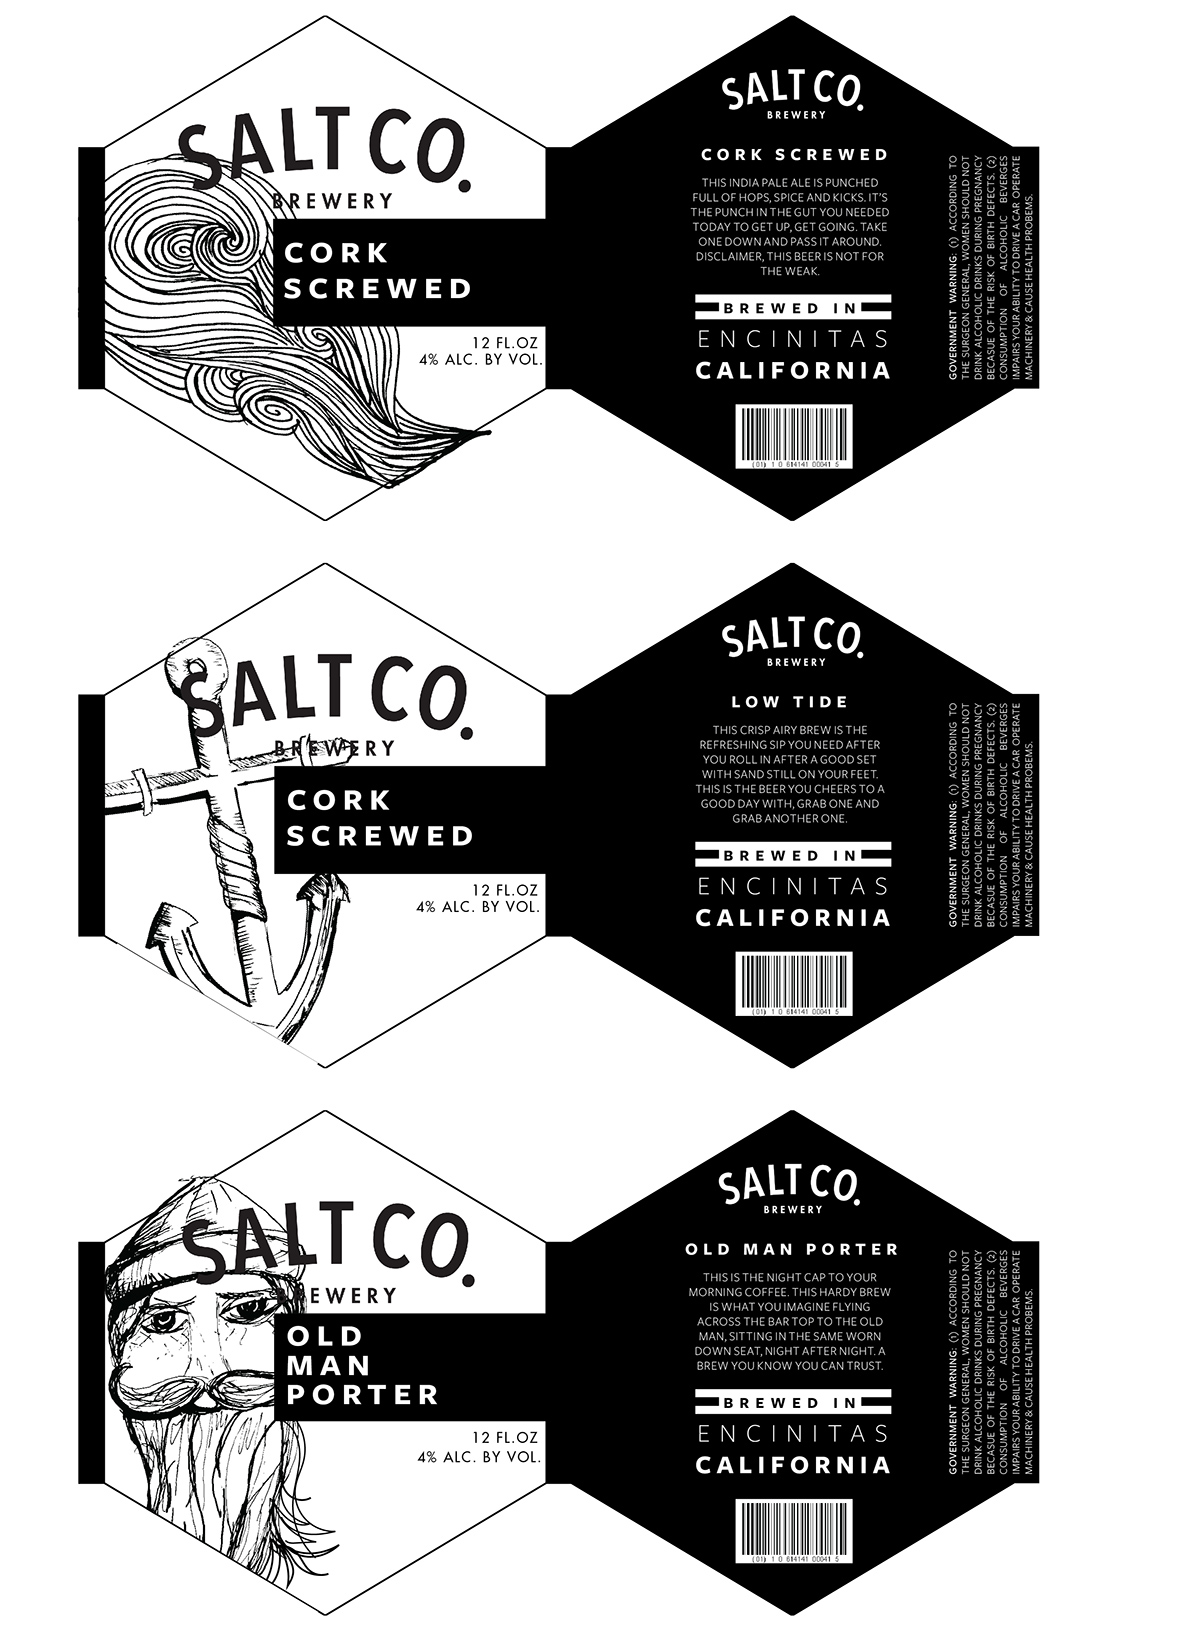 Salt Co surfing subculture process semester Project brands Coffee beer labels black and white